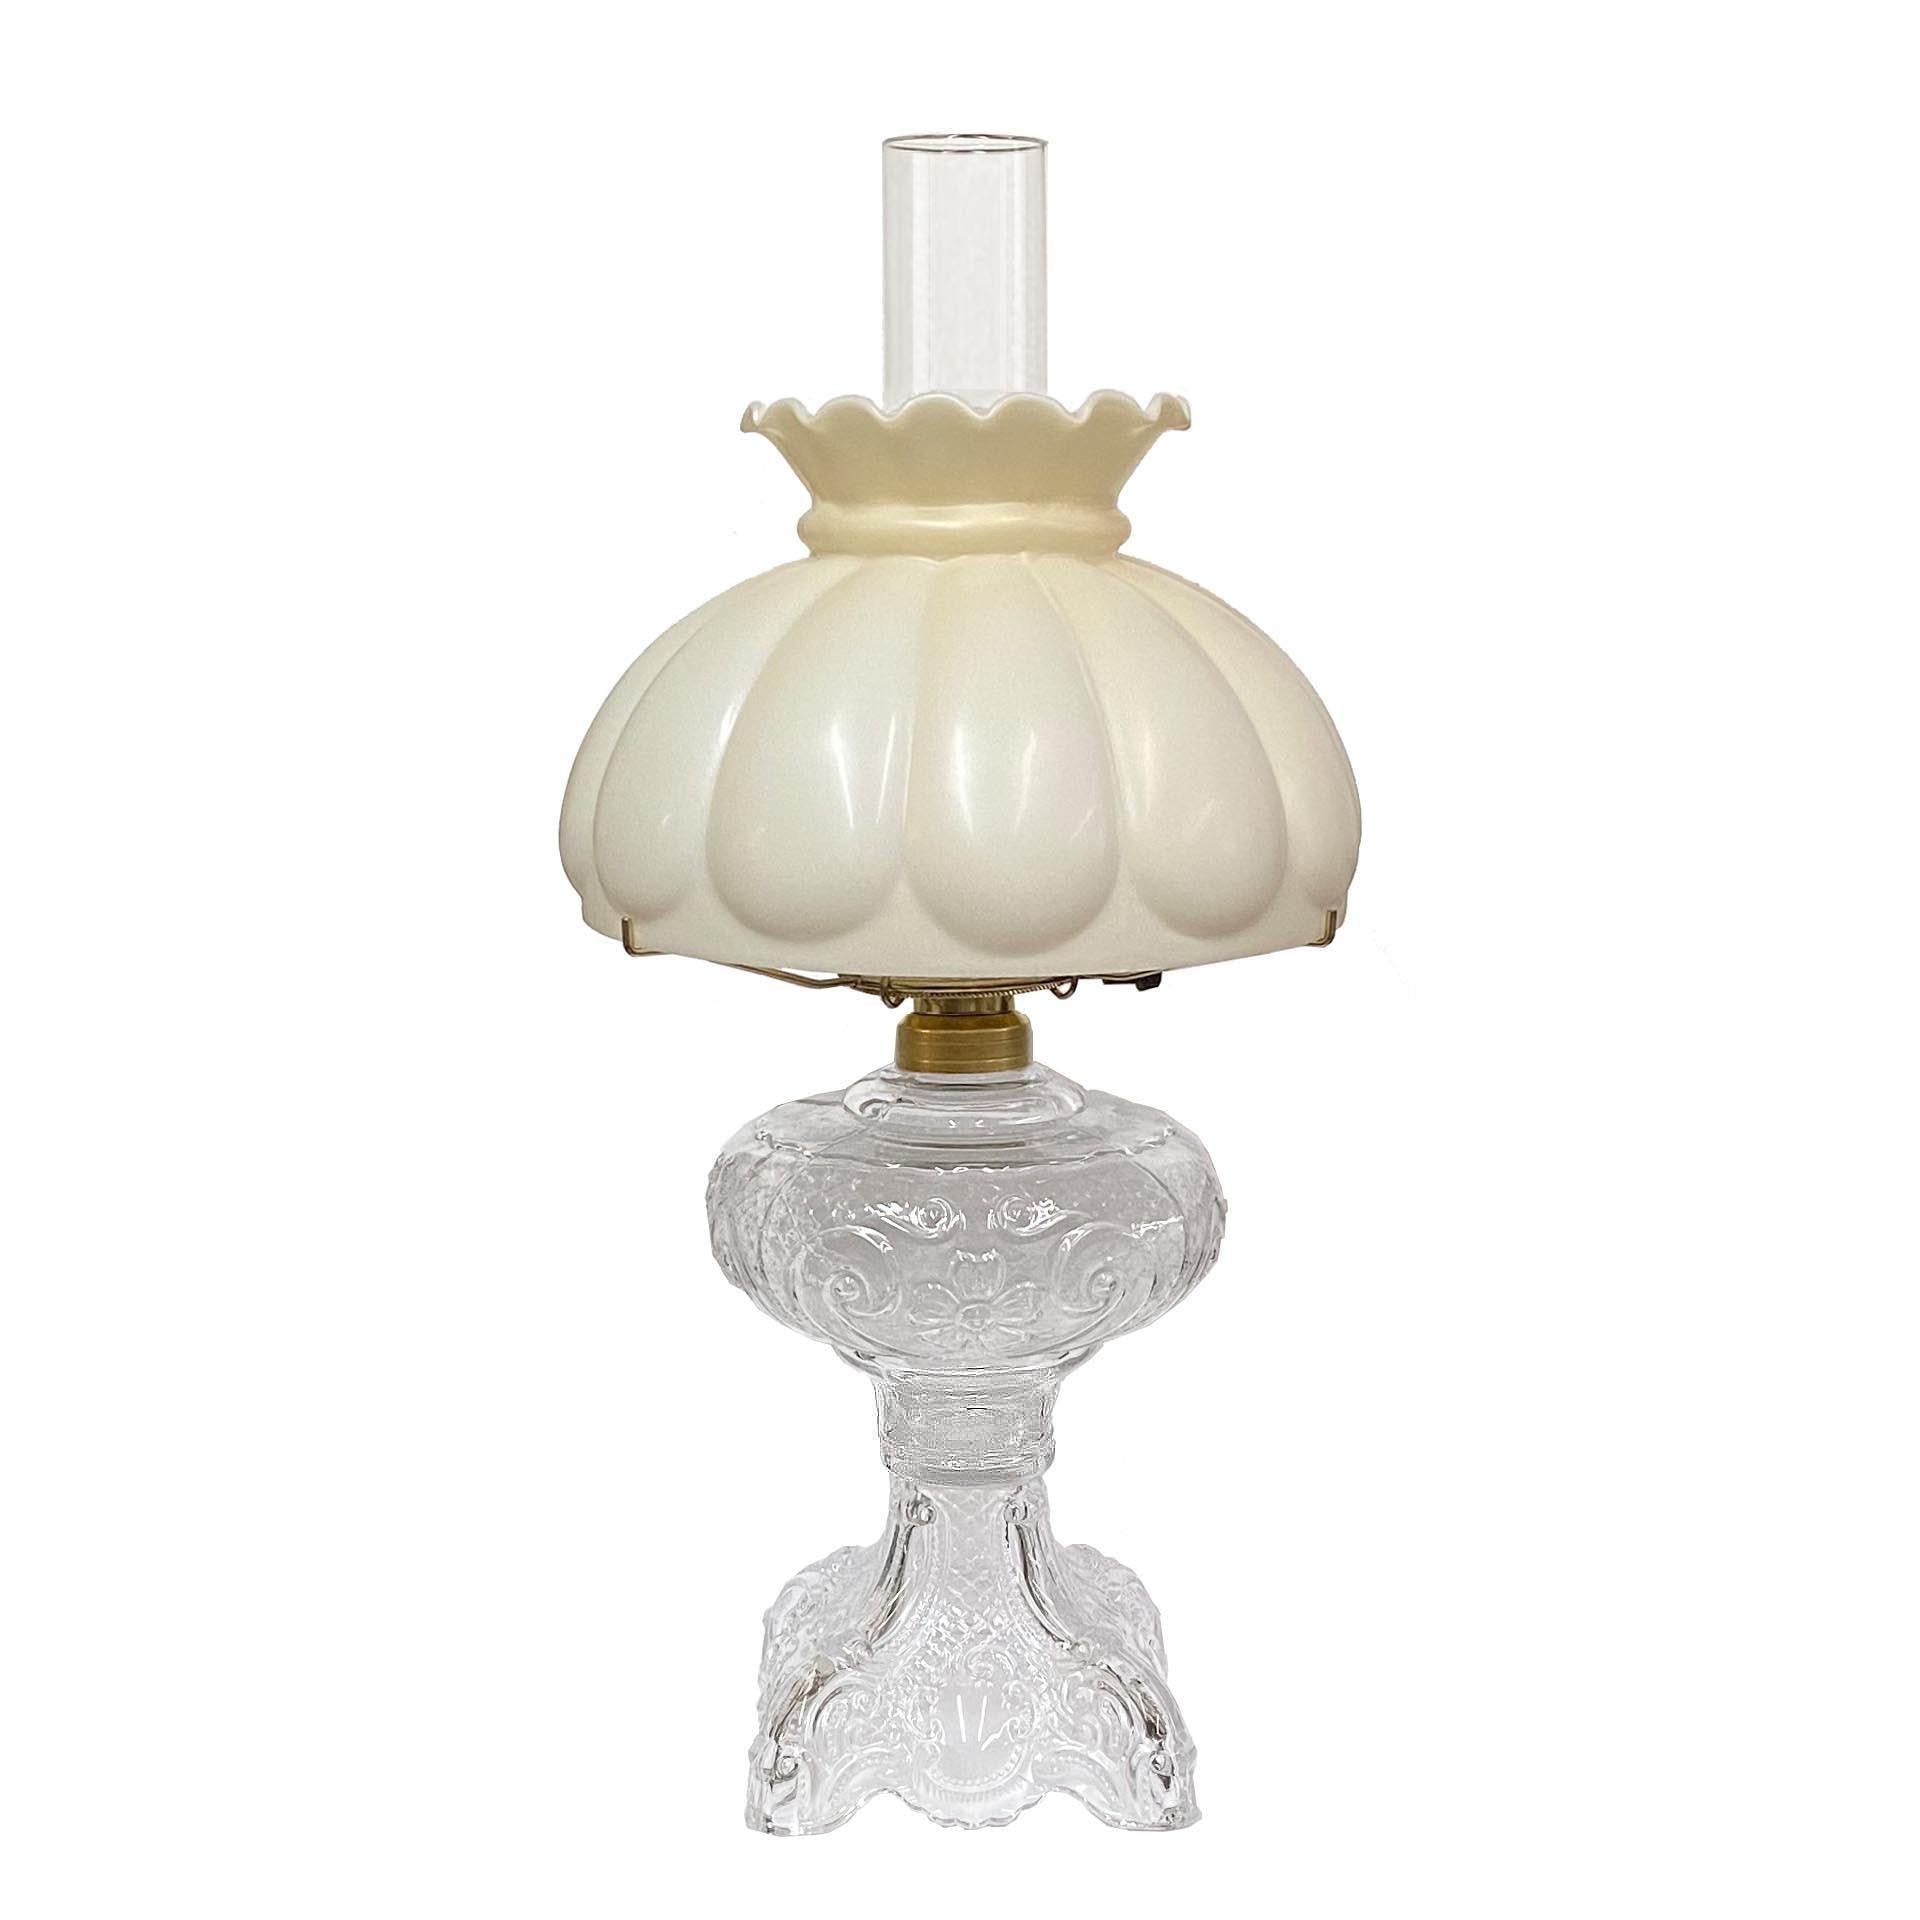 Vintage style Glass Lamp